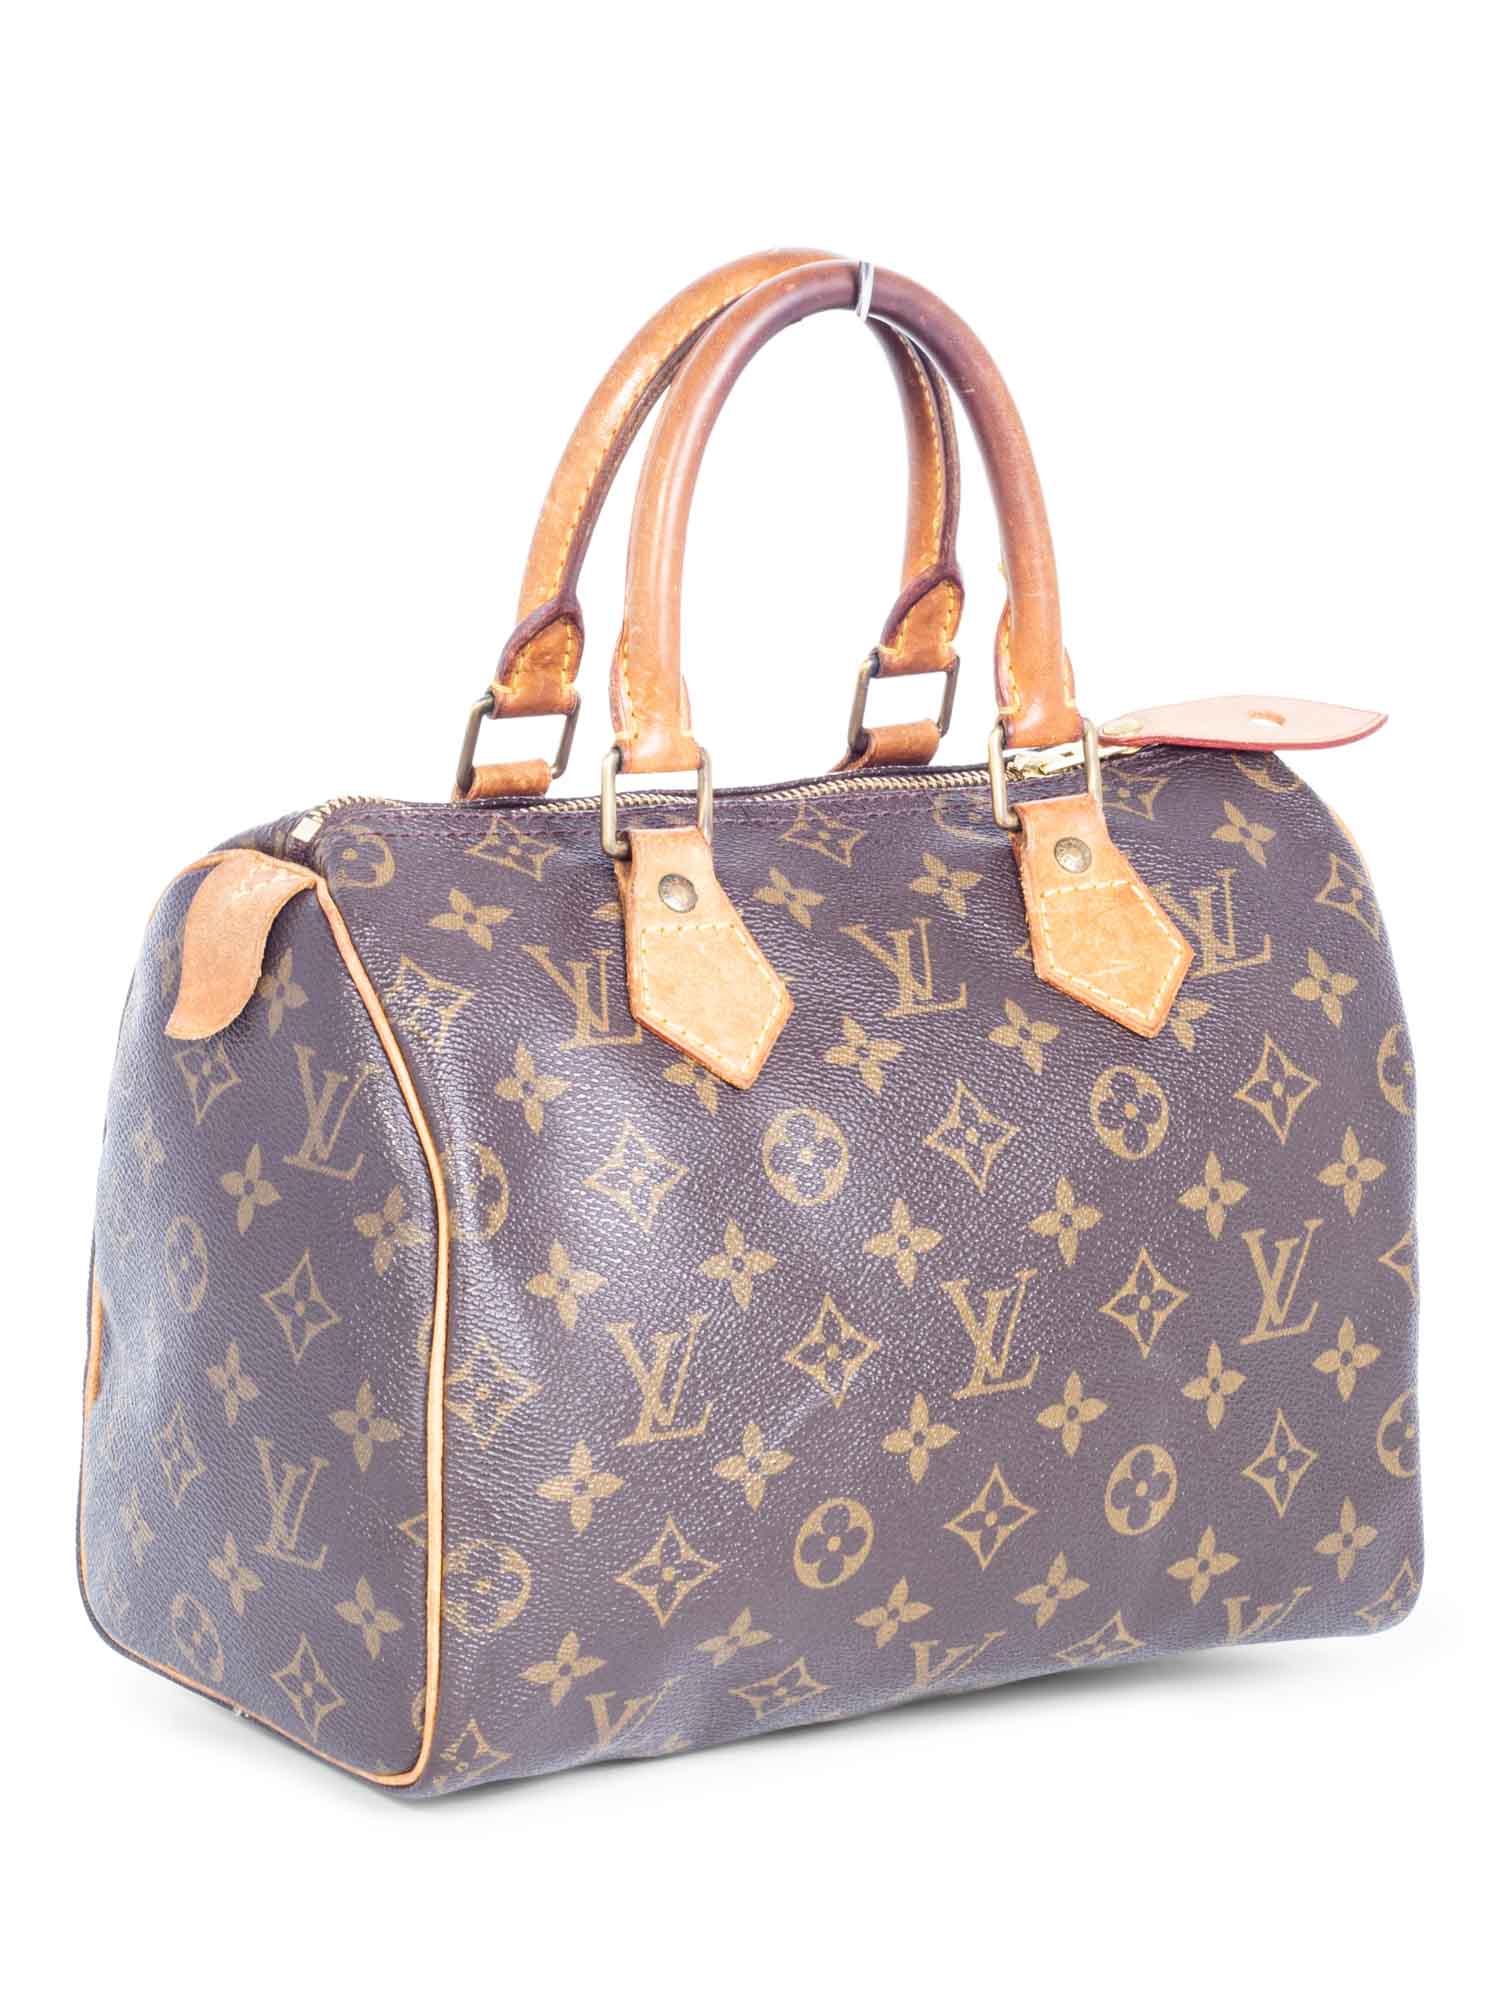 The Ultimate Guide to the Louis Vuitton Speedy Bag - Handbagholic